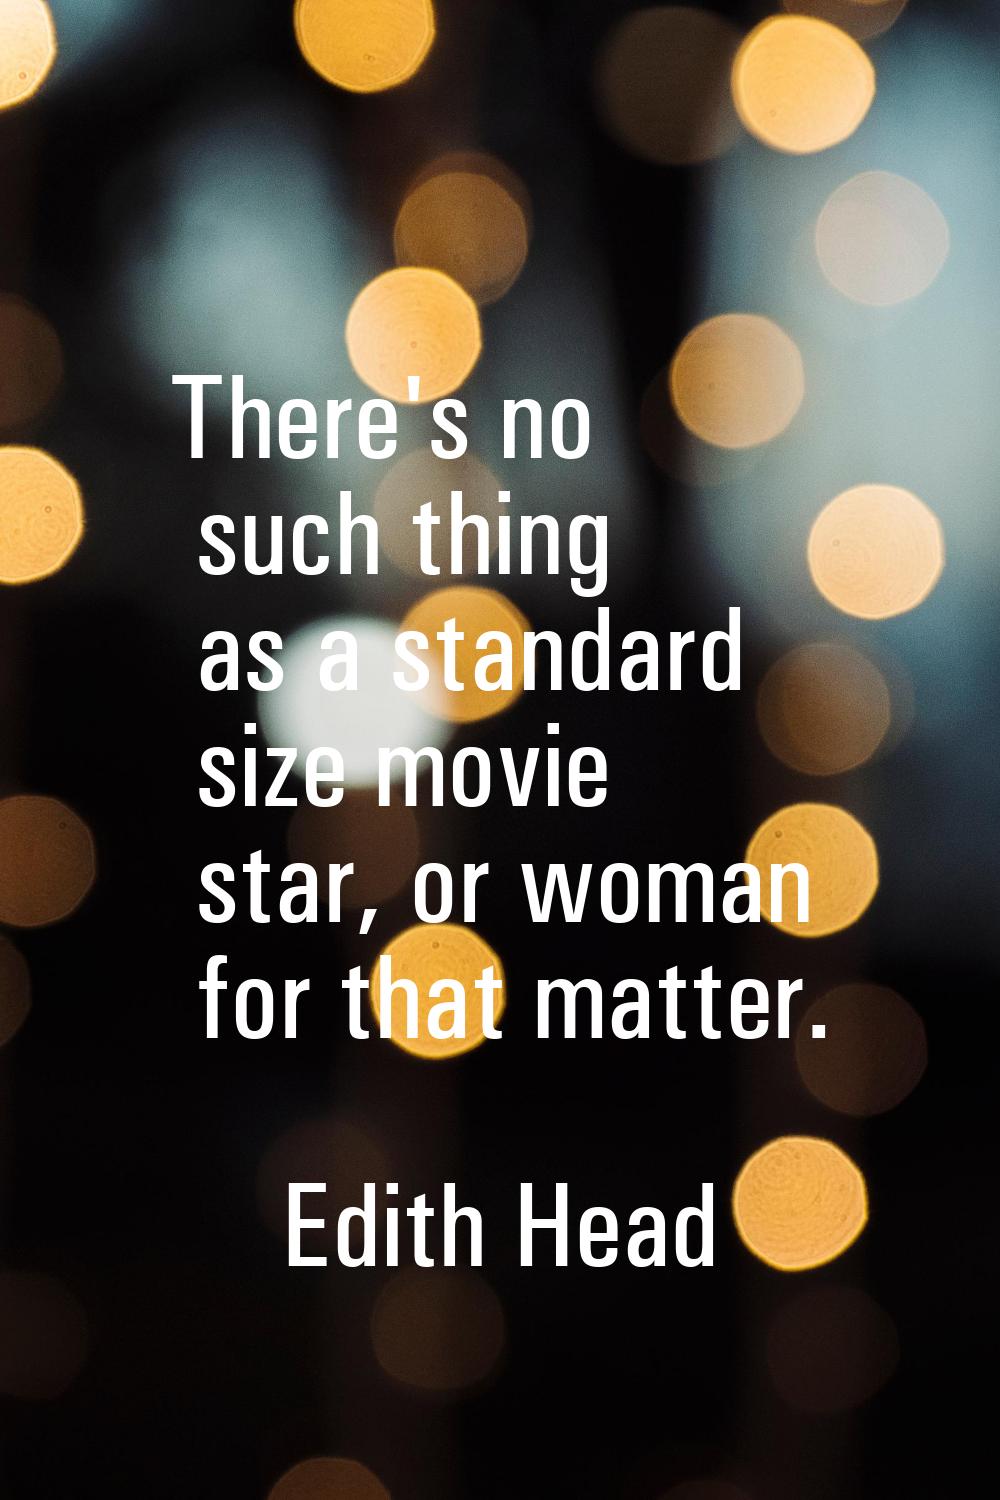 There's no such thing as a standard size movie star, or woman for that matter.